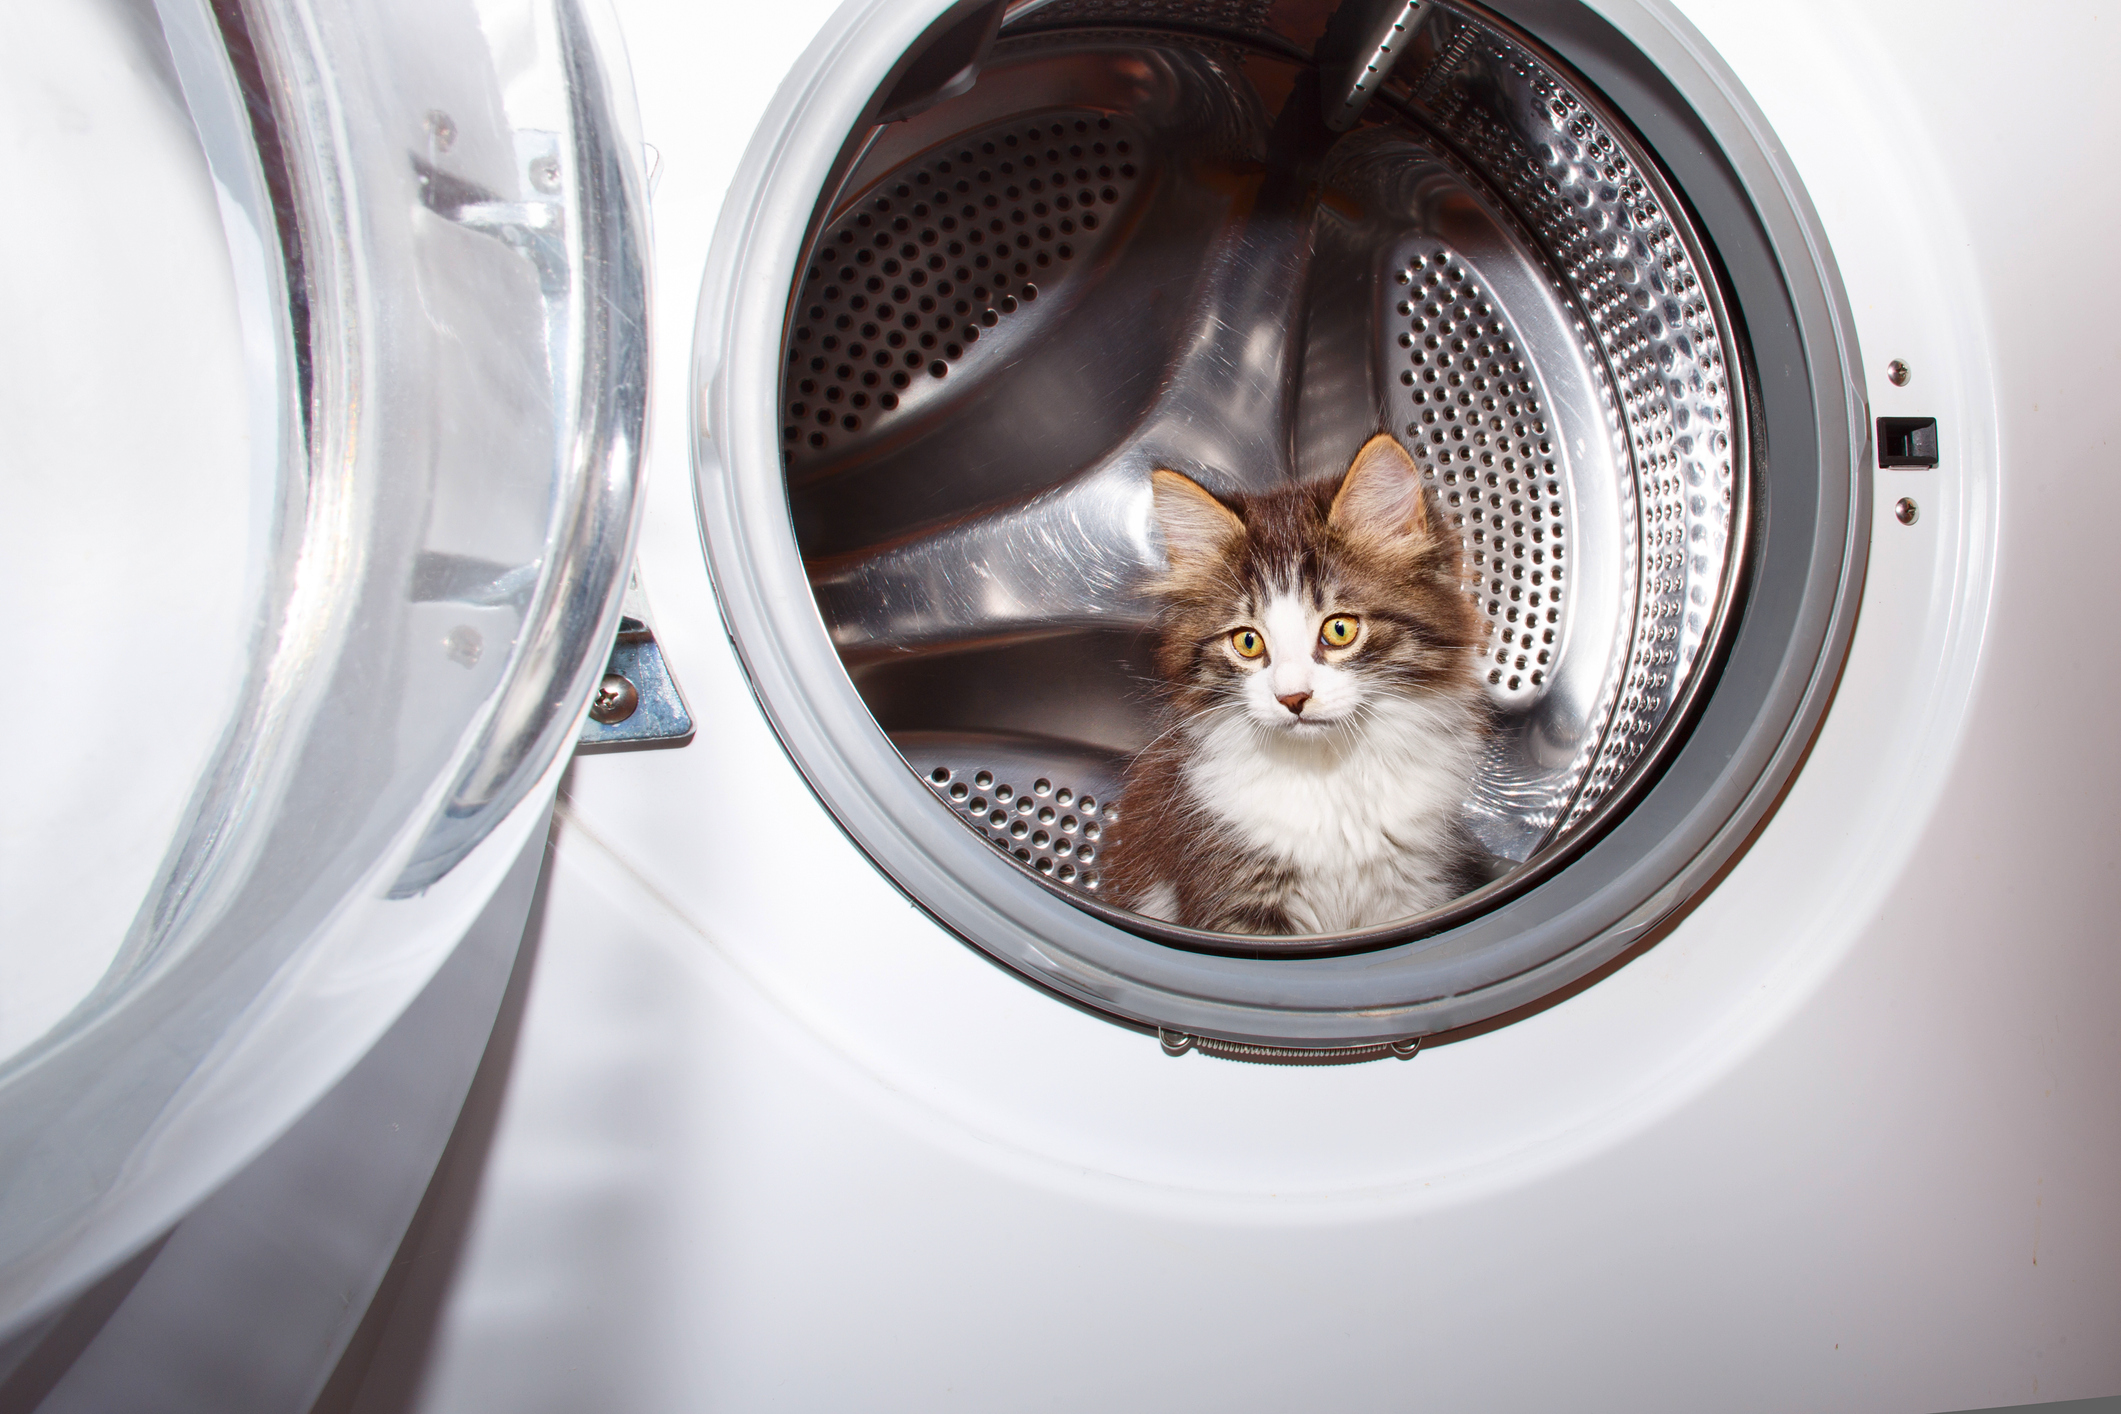 Why Is My Cat Hiding Behind The Washing Machine